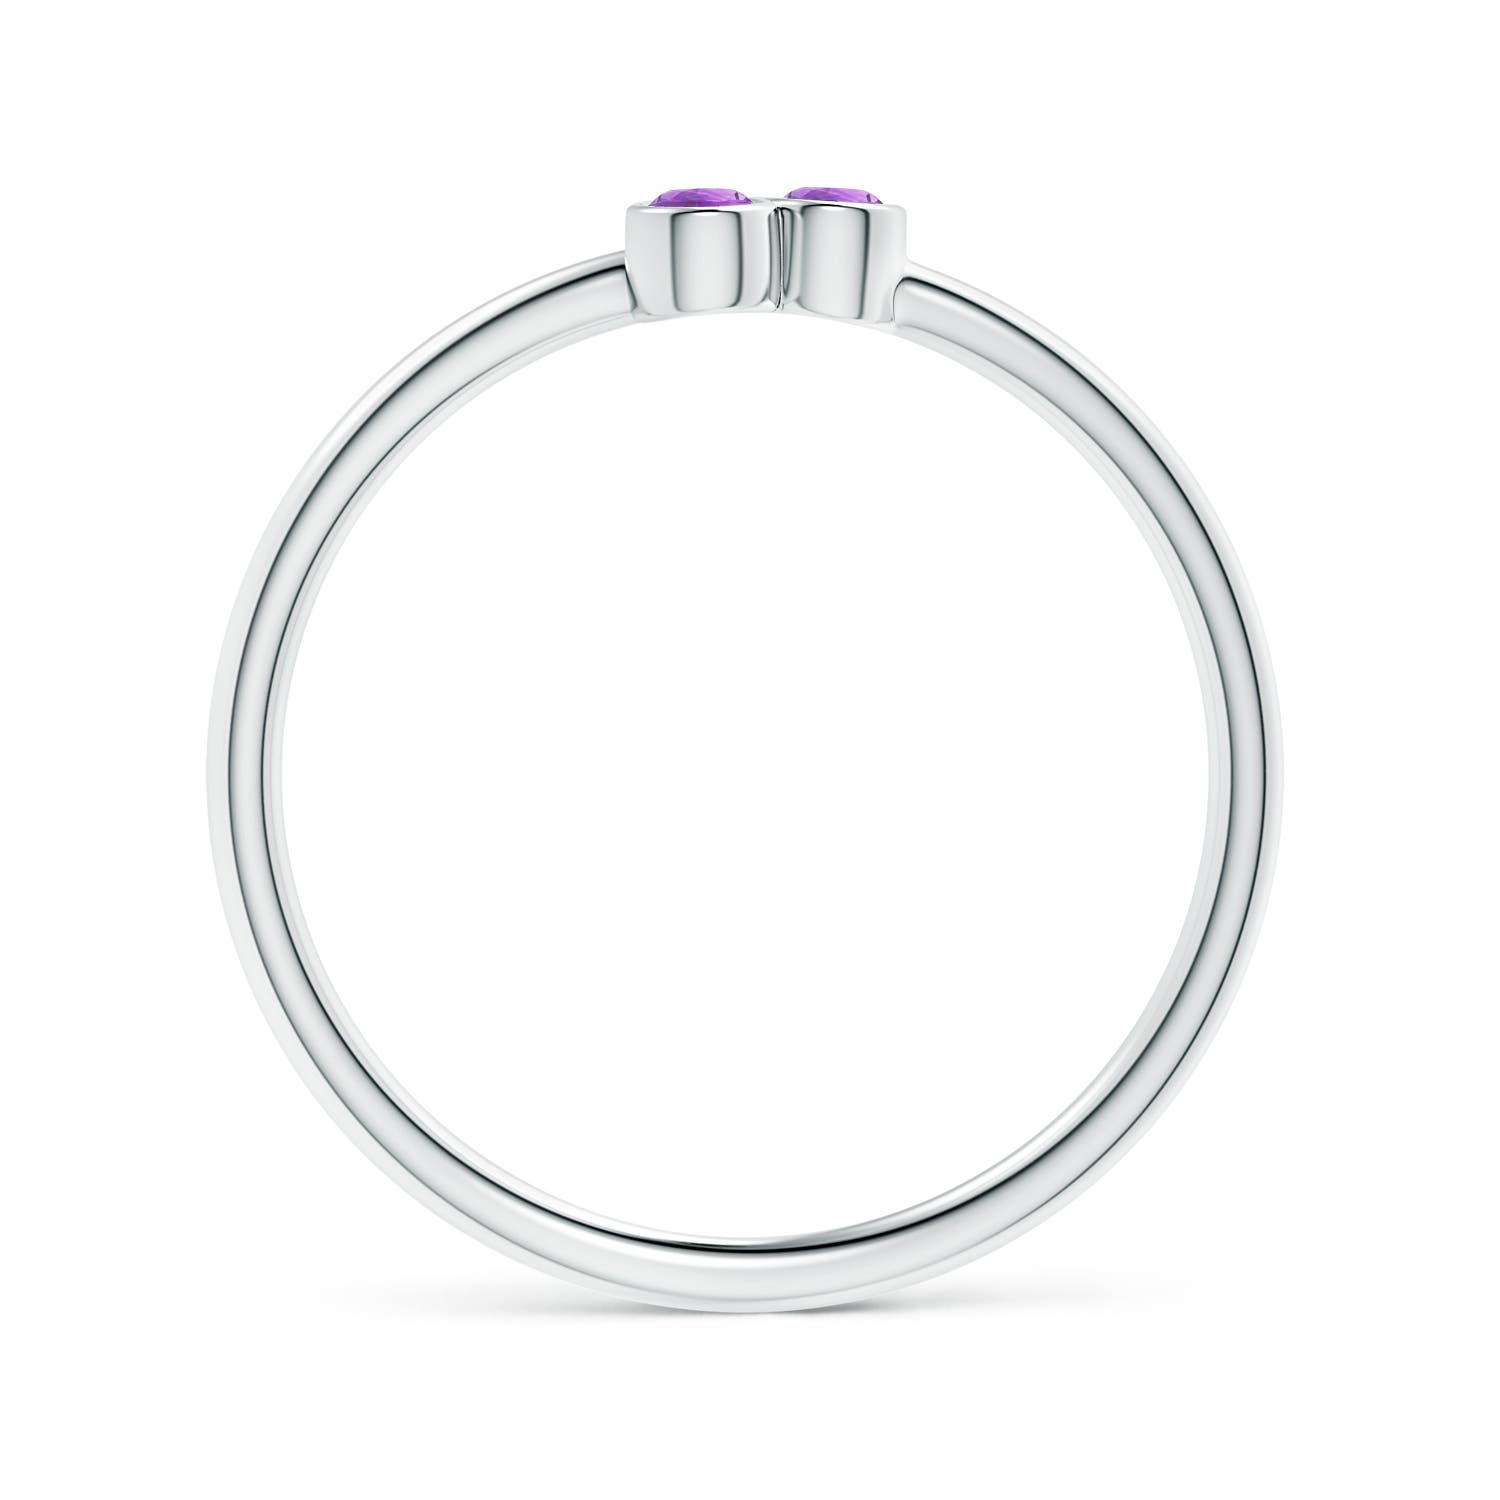 AAA - Amethyst / 0.09 CT / 14 KT White Gold